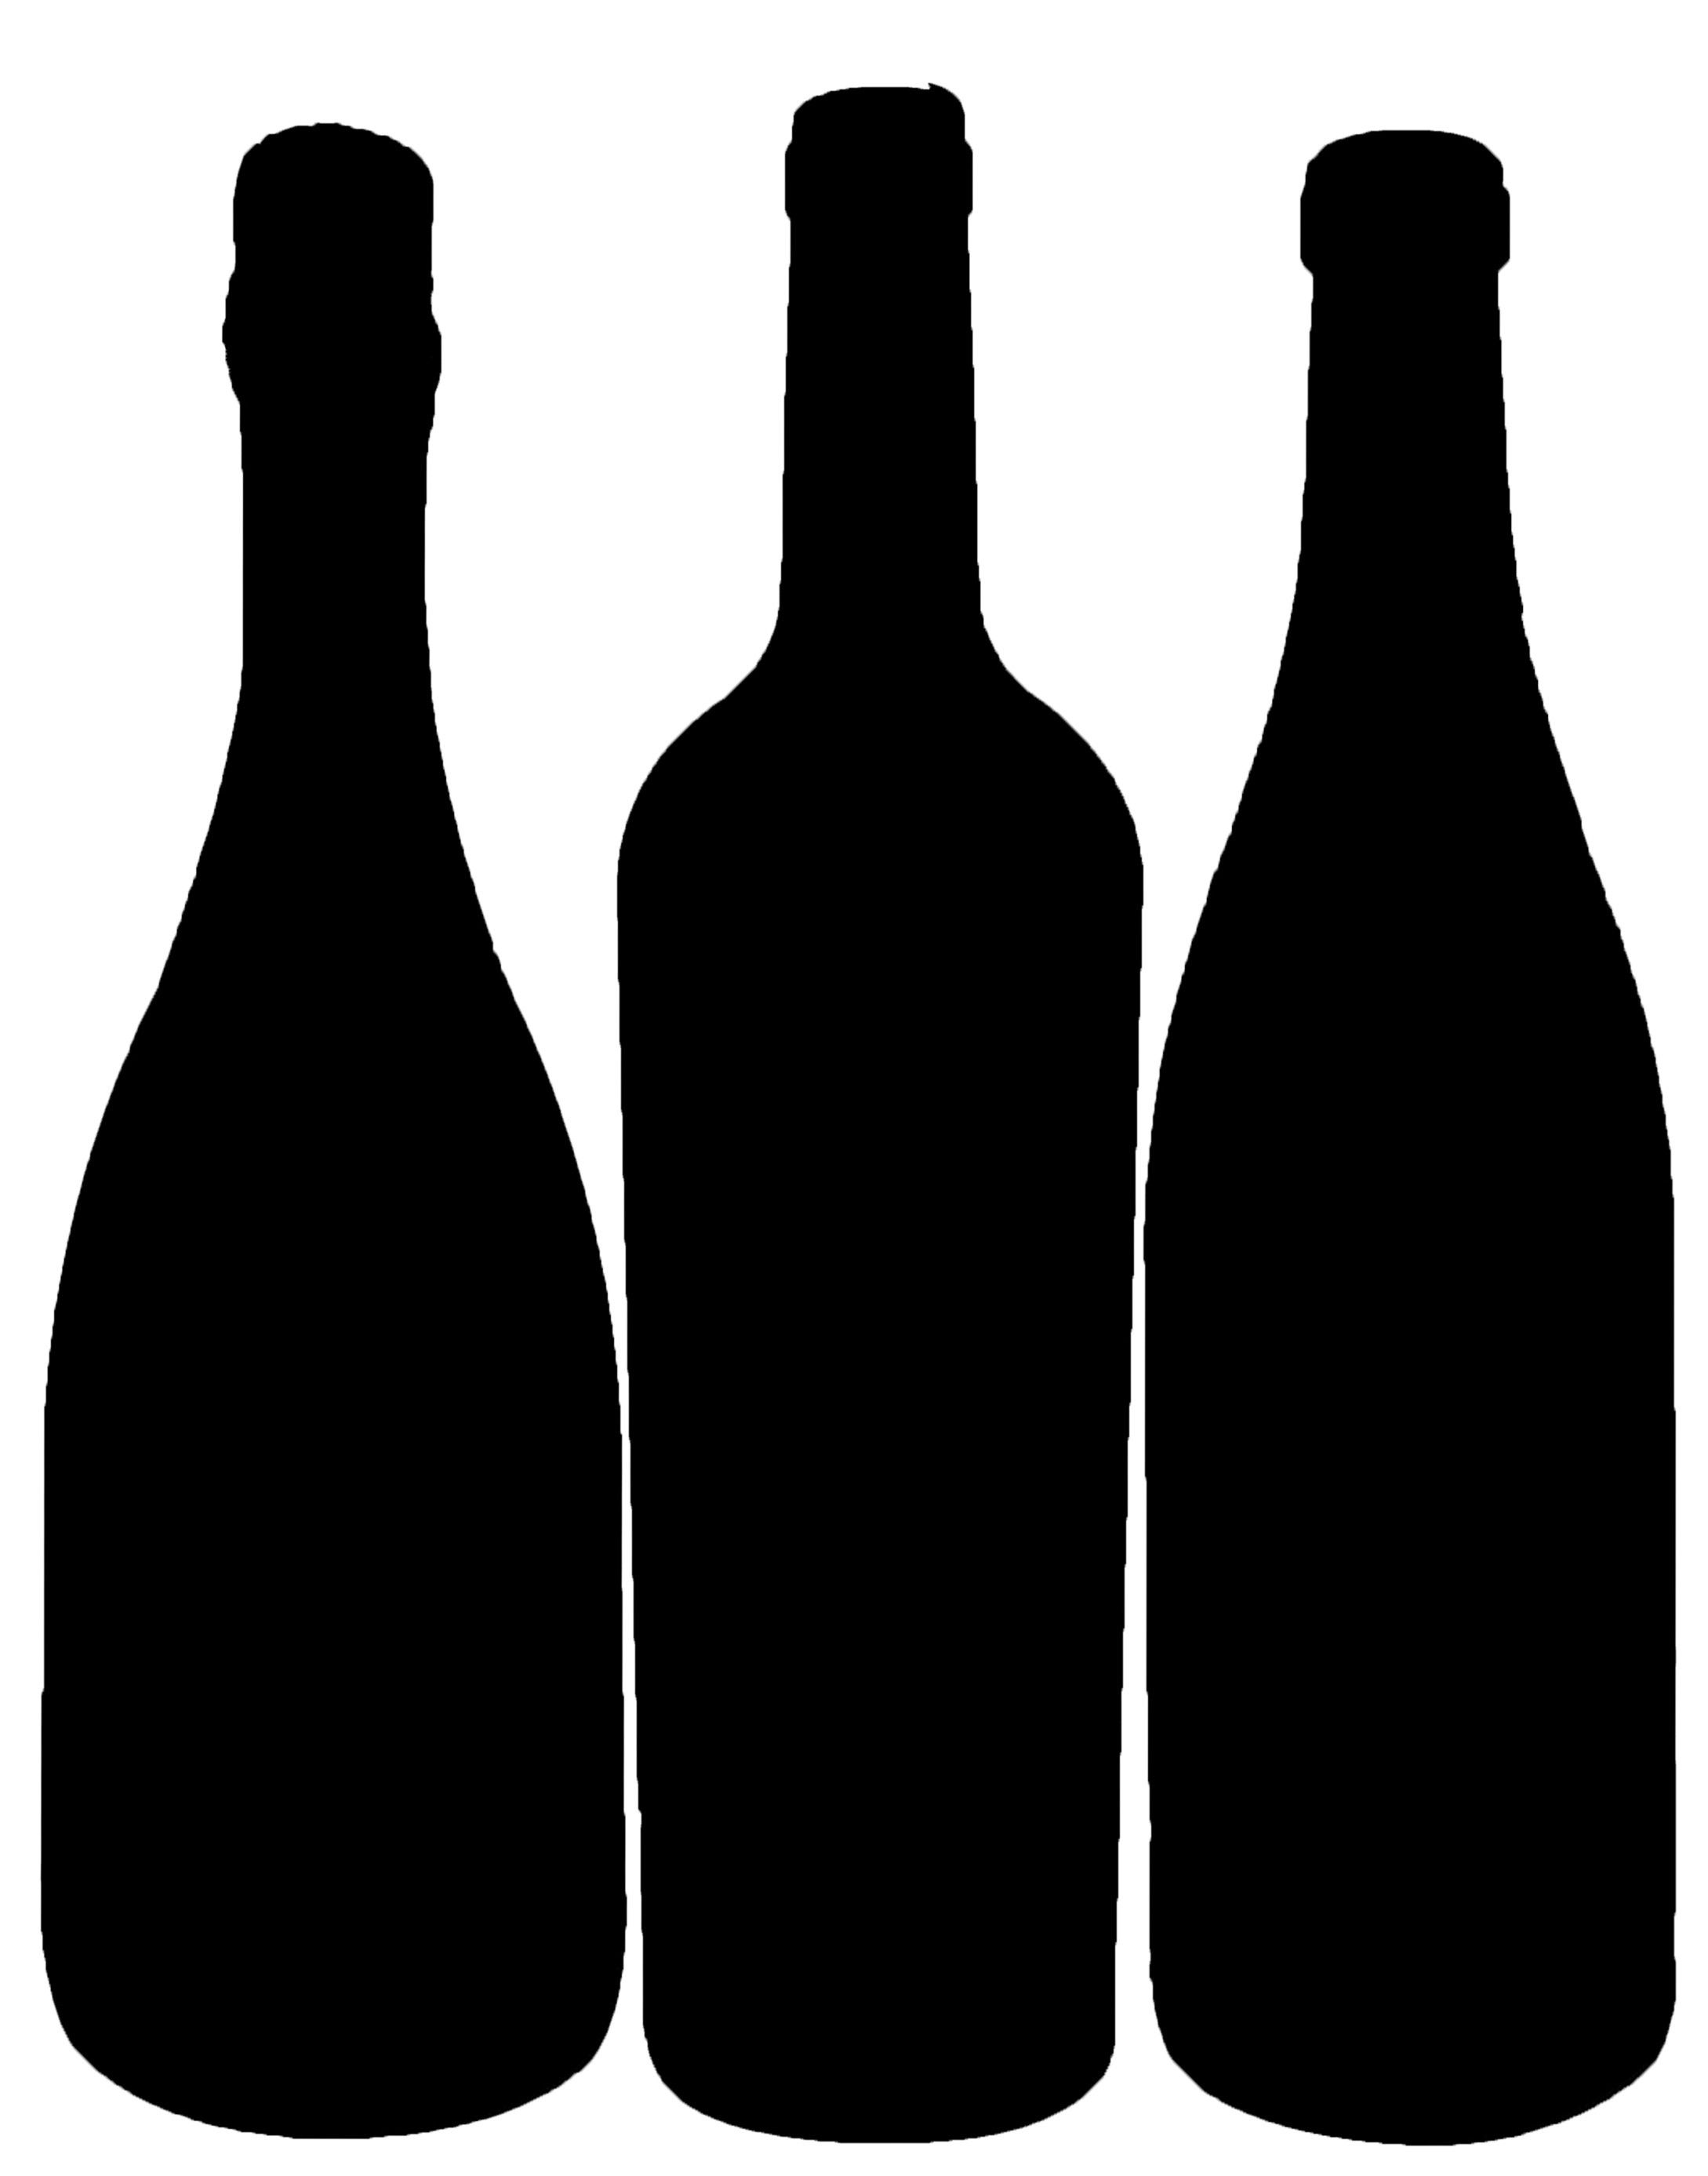 Bottle silhouette | Cameo- svg | Pinterest | Silhouette, Bottle and ...